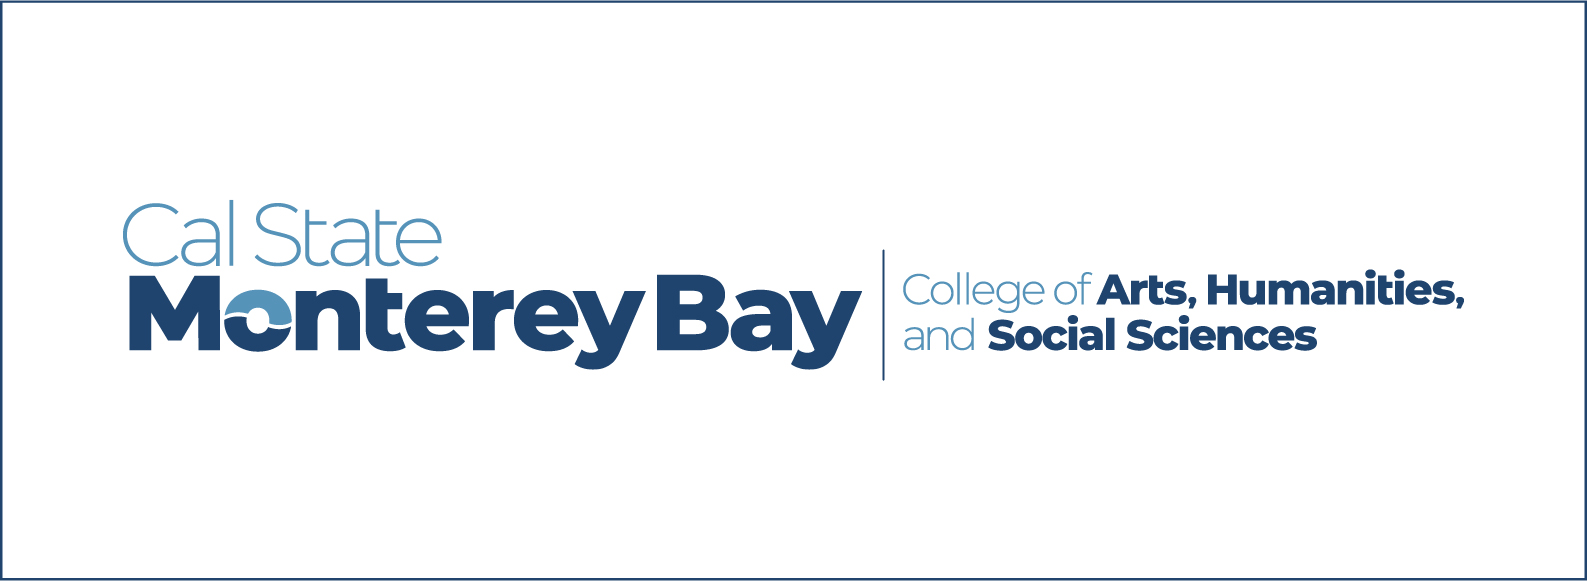 Cal State Monterey Bay, College of Arts, Humanities and Social Sciences Logo